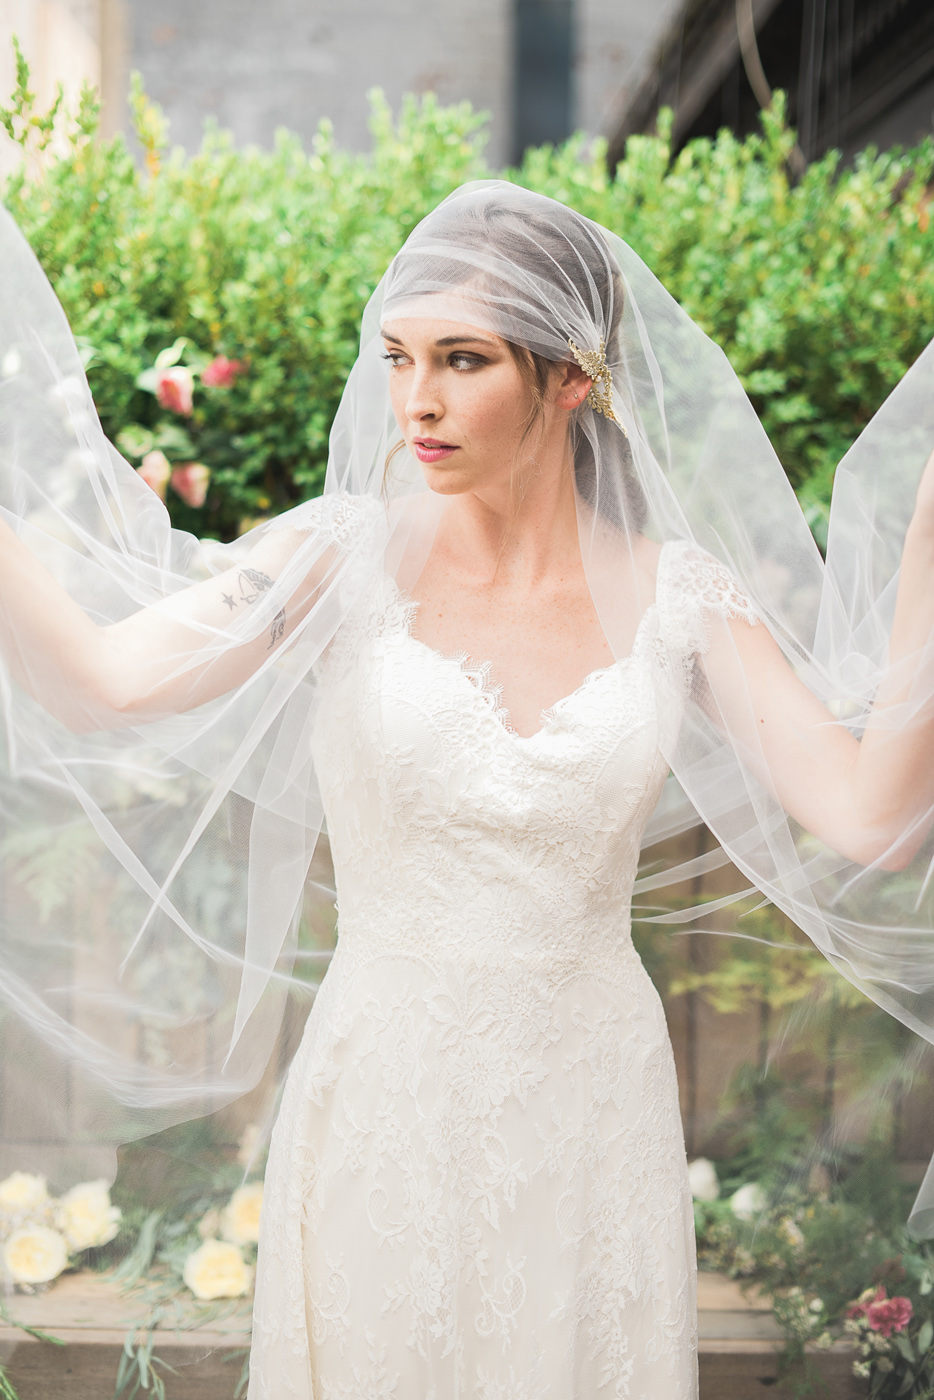 juliet cap tulle veil with gold vine flower crystal detail lace gown hushed commotion